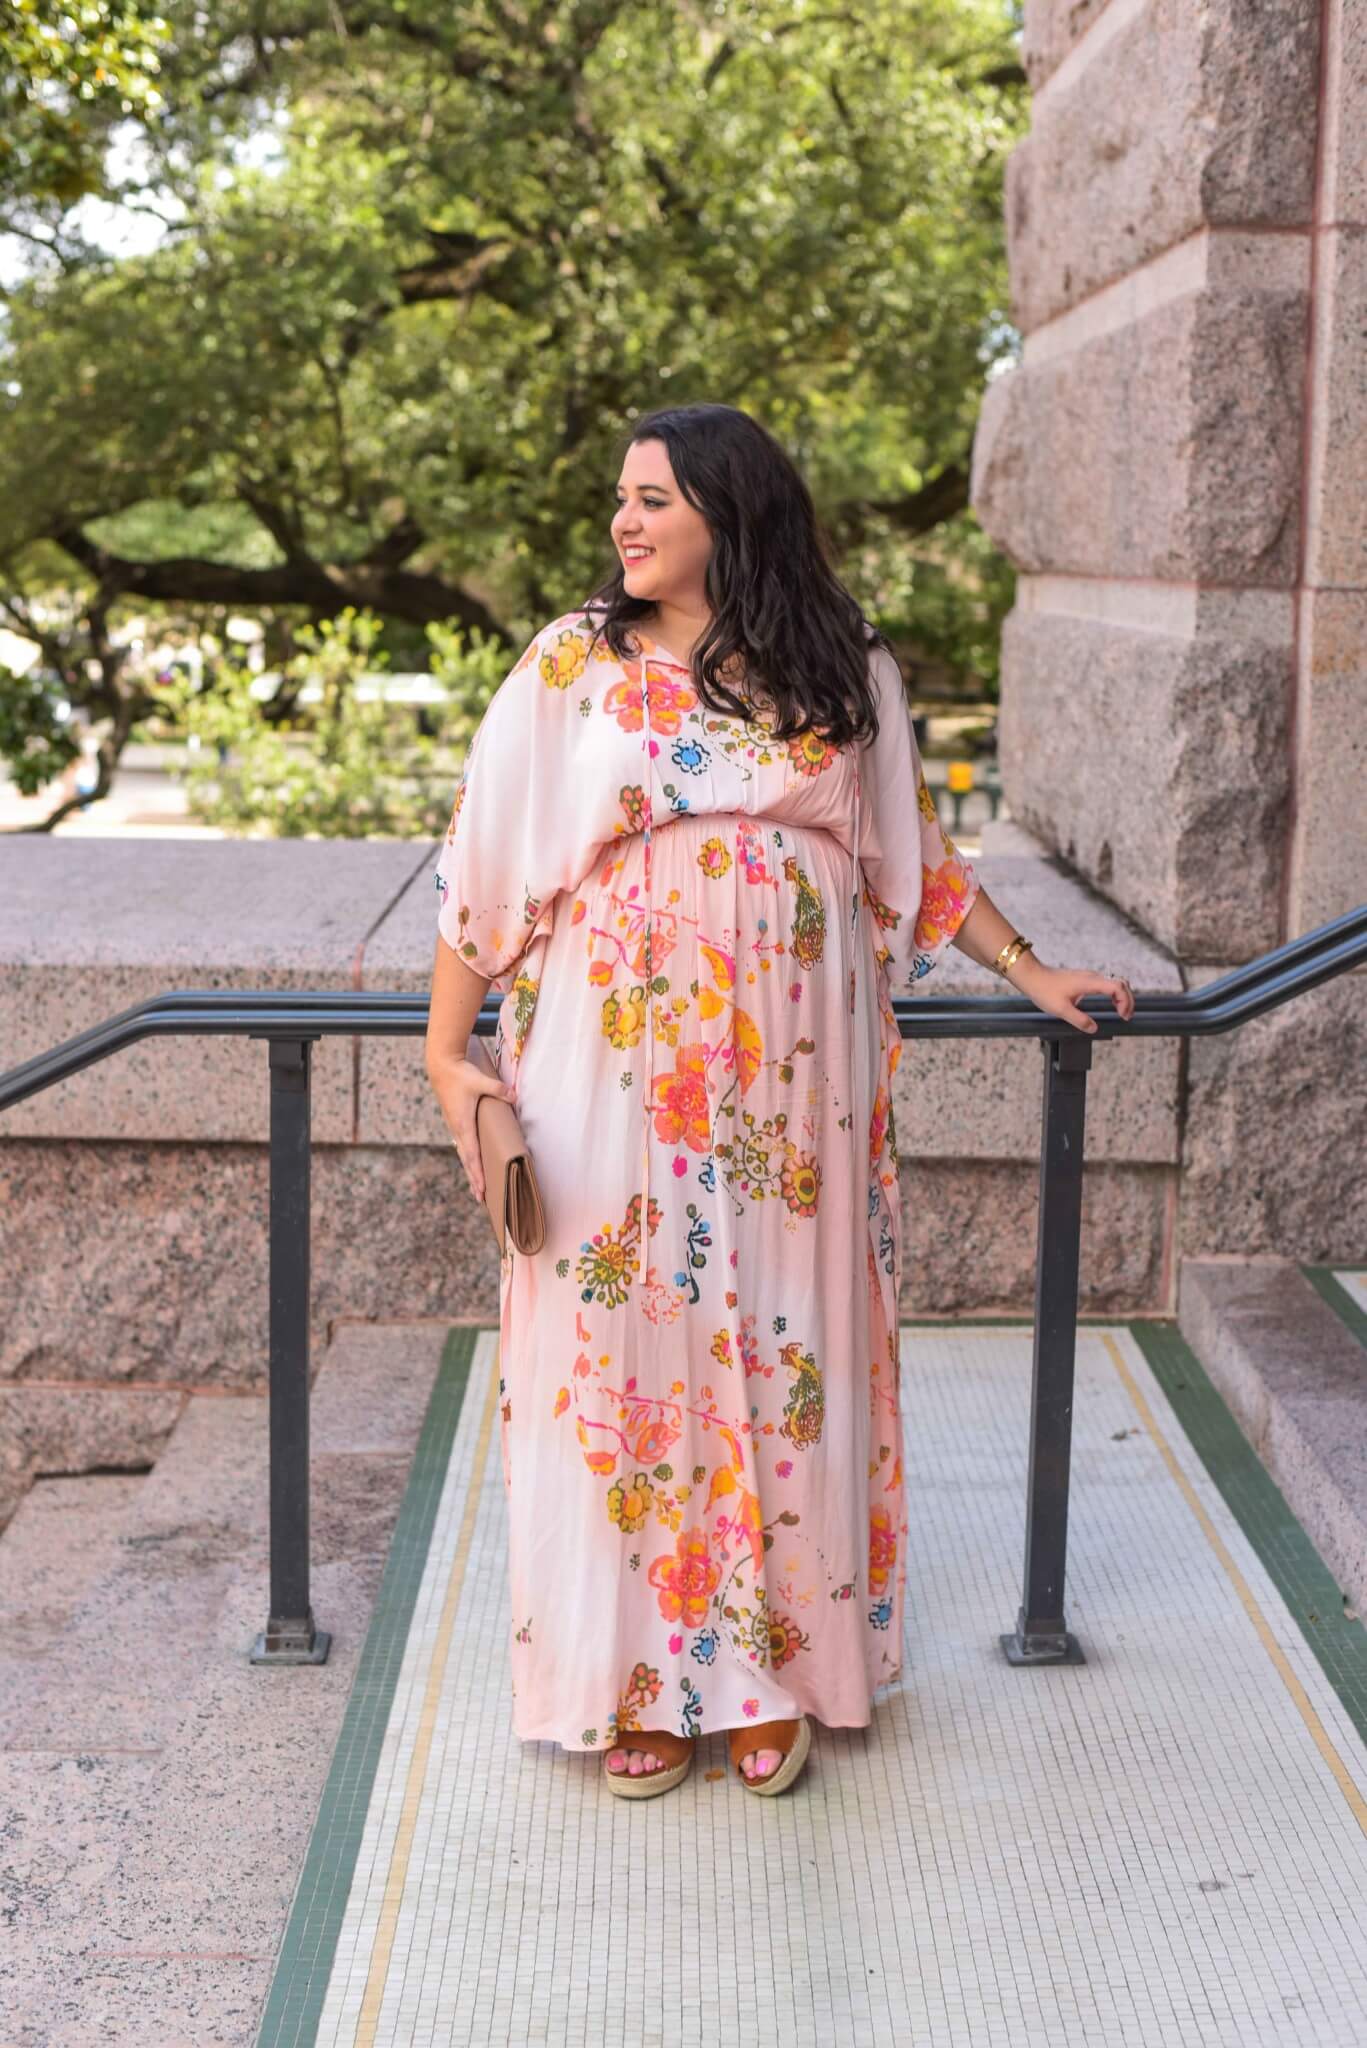 Looking for the perfect date night outfit? A beautiful printed maxi dress goes easily from day to night. #datenight #plussizefashion